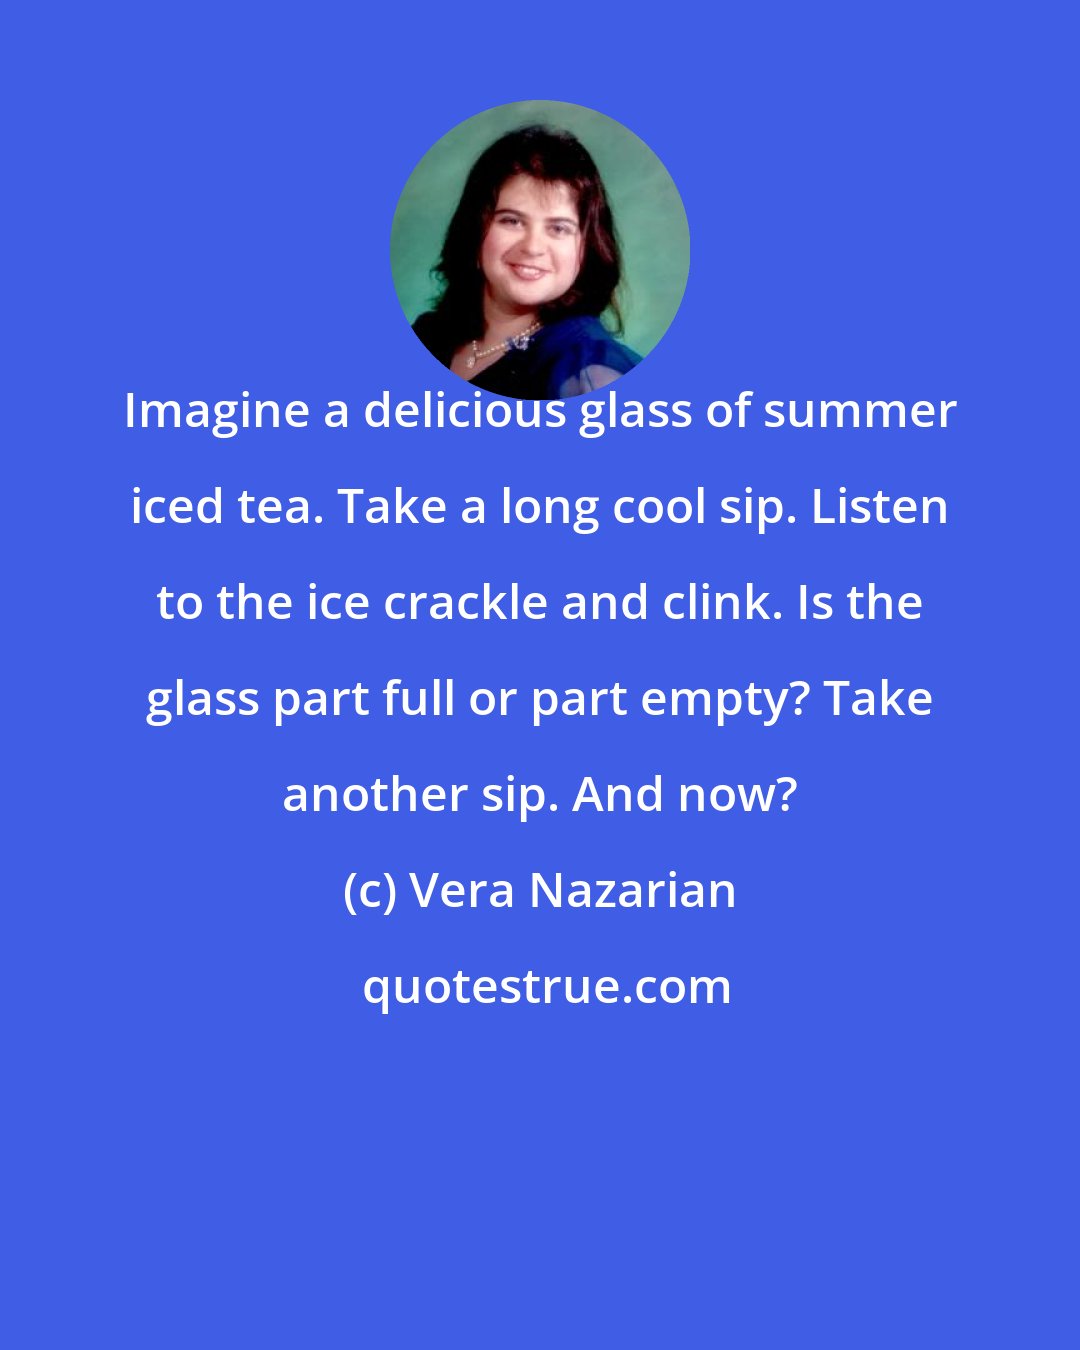 Vera Nazarian: Imagine a delicious glass of summer iced tea. Take a long cool sip. Listen to the ice crackle and clink. Is the glass part full or part empty? Take another sip. And now?